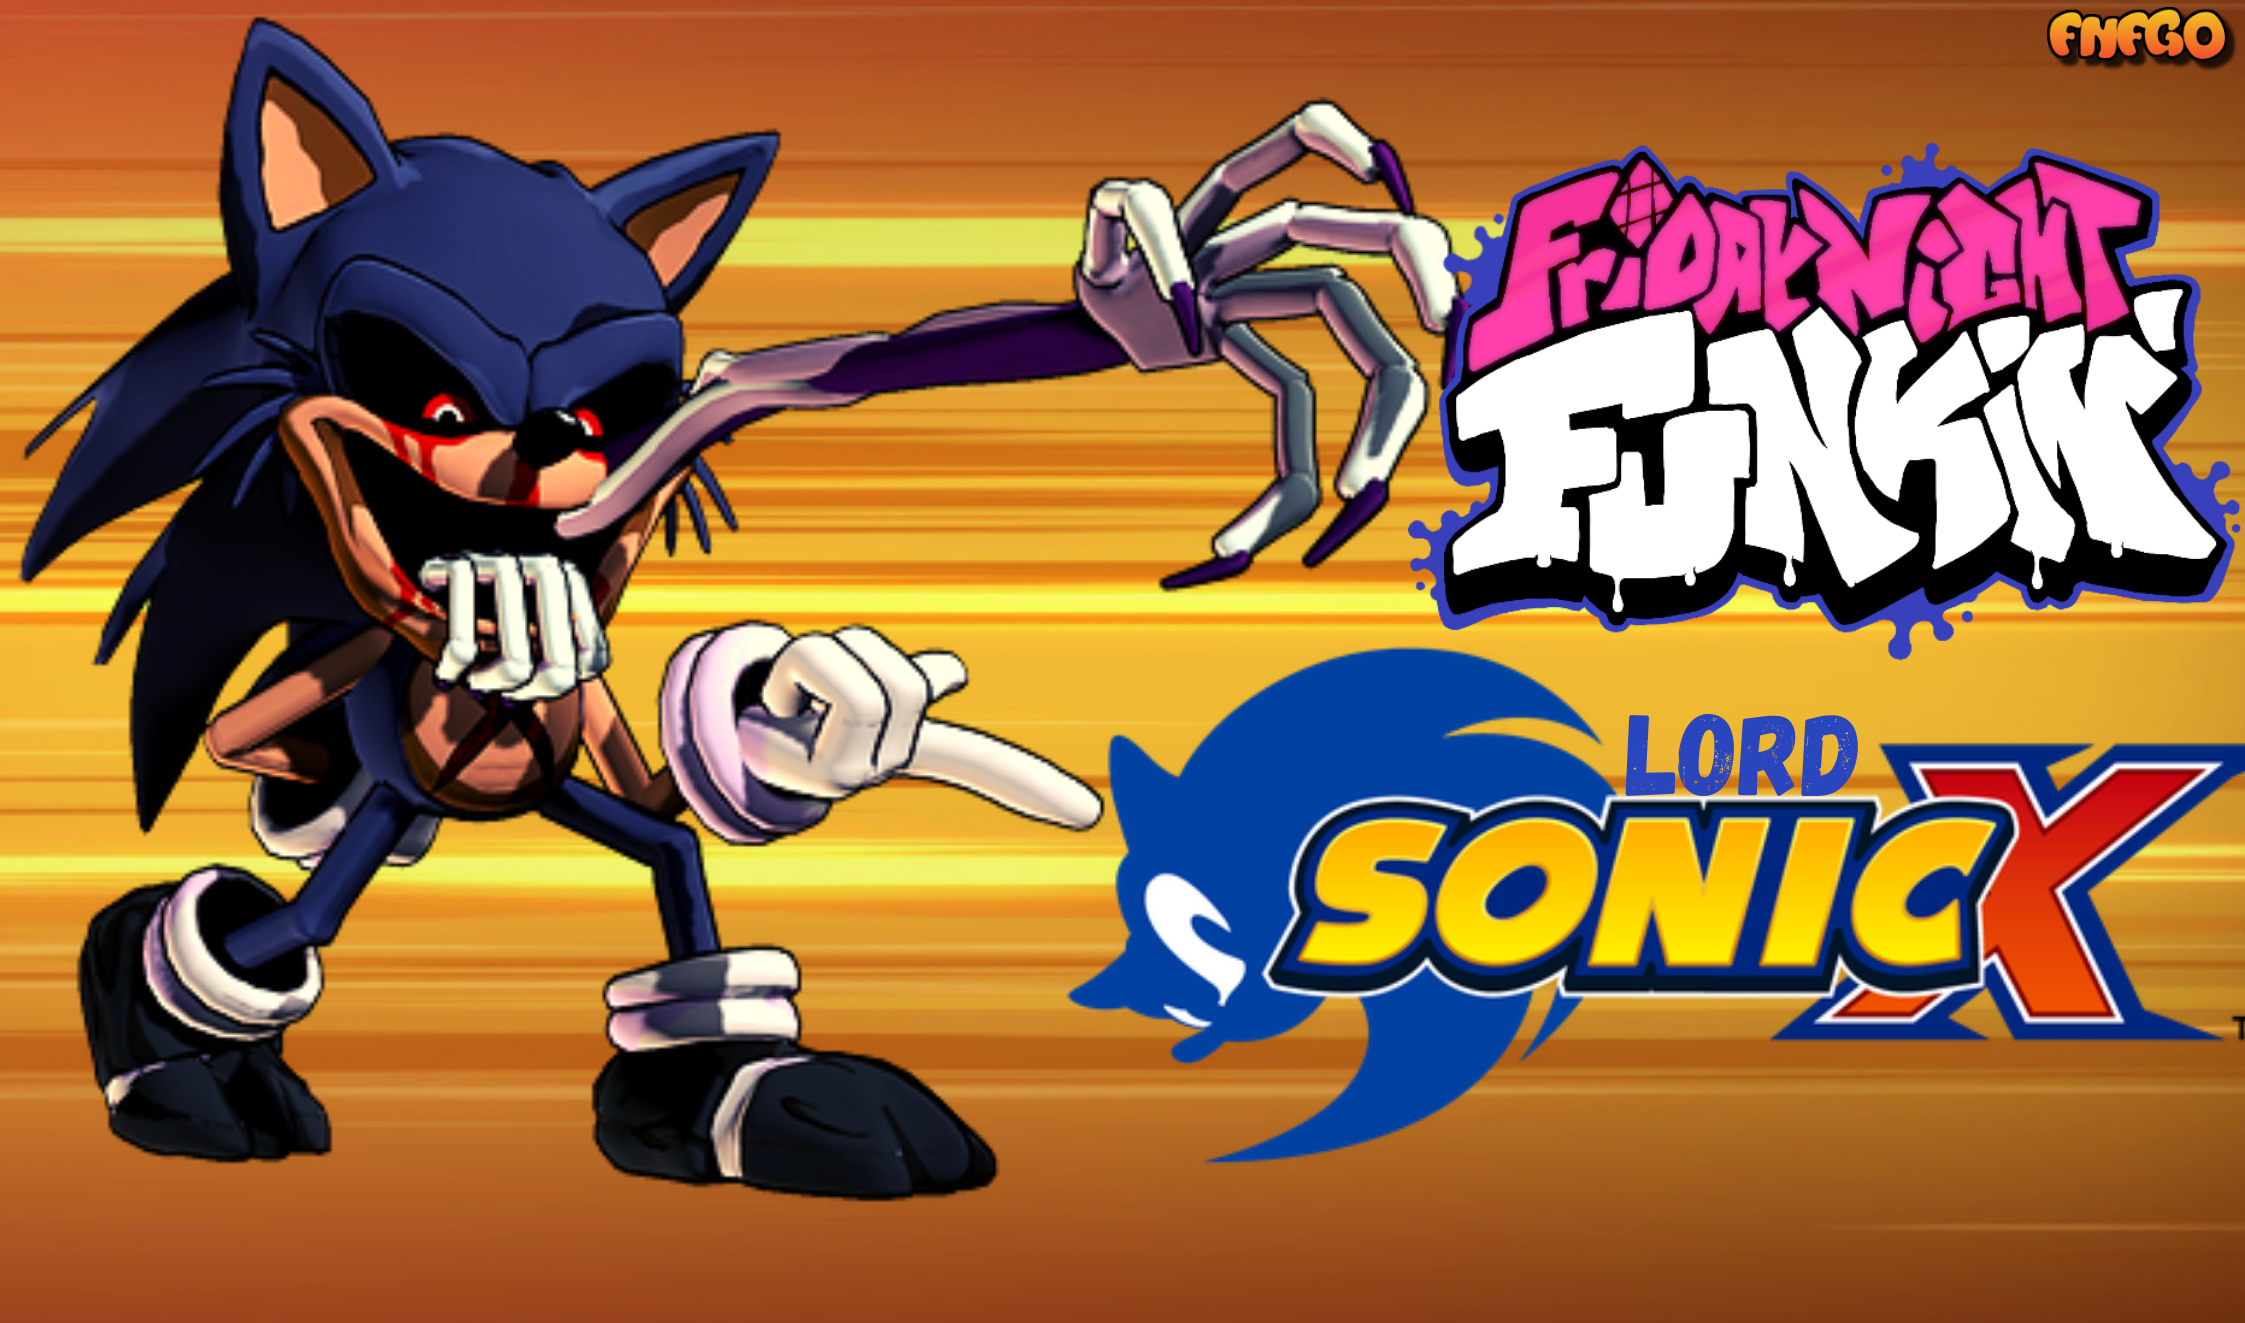 FNF Cycles Encore vs Sonic Lord X 🔥 Play online